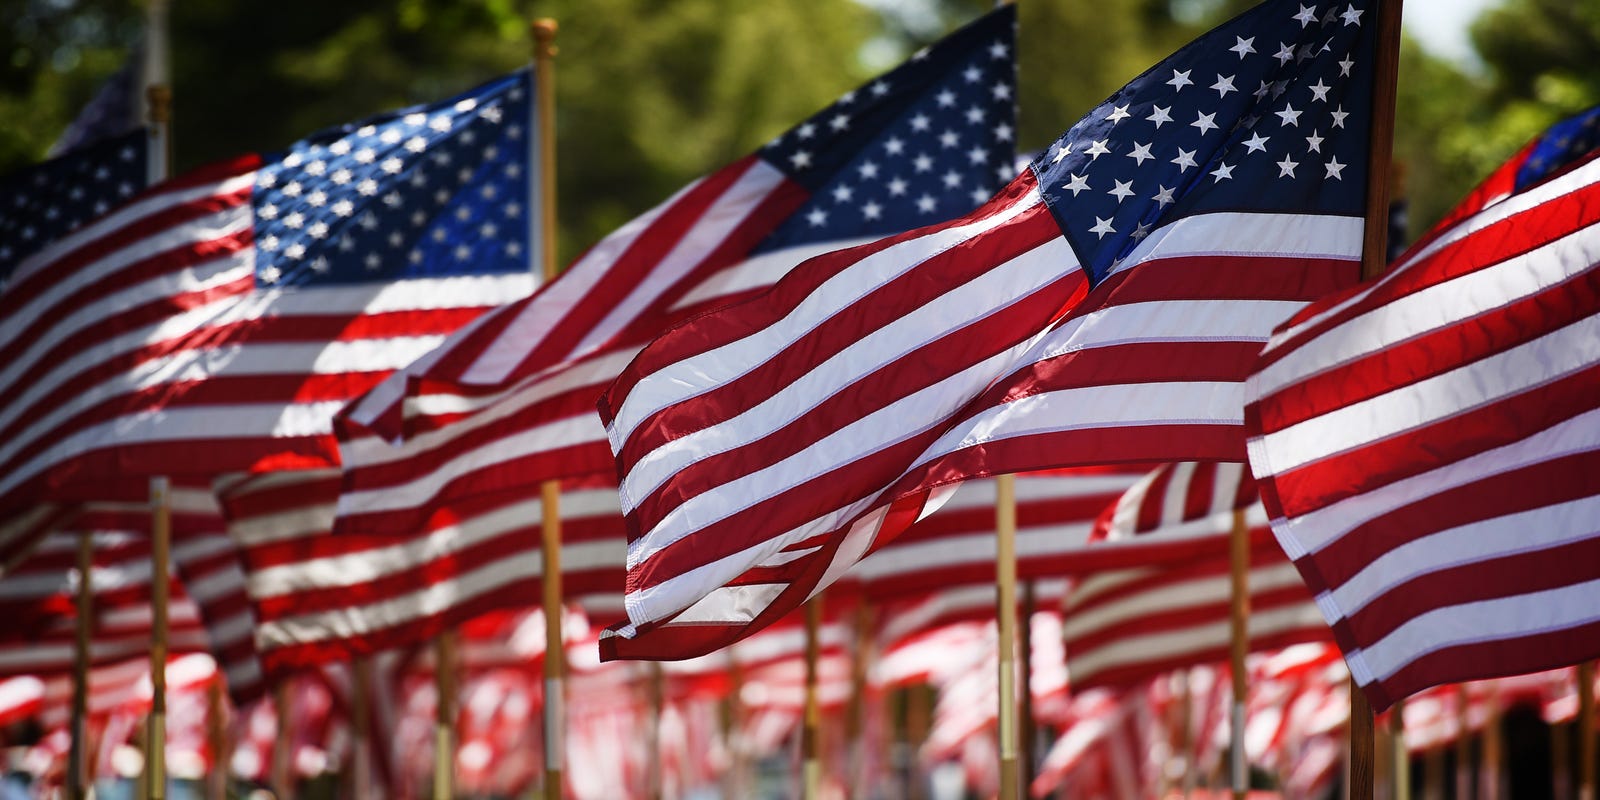 flag-day-do-you-know-how-to-properly-display-the-stars-and-stripes